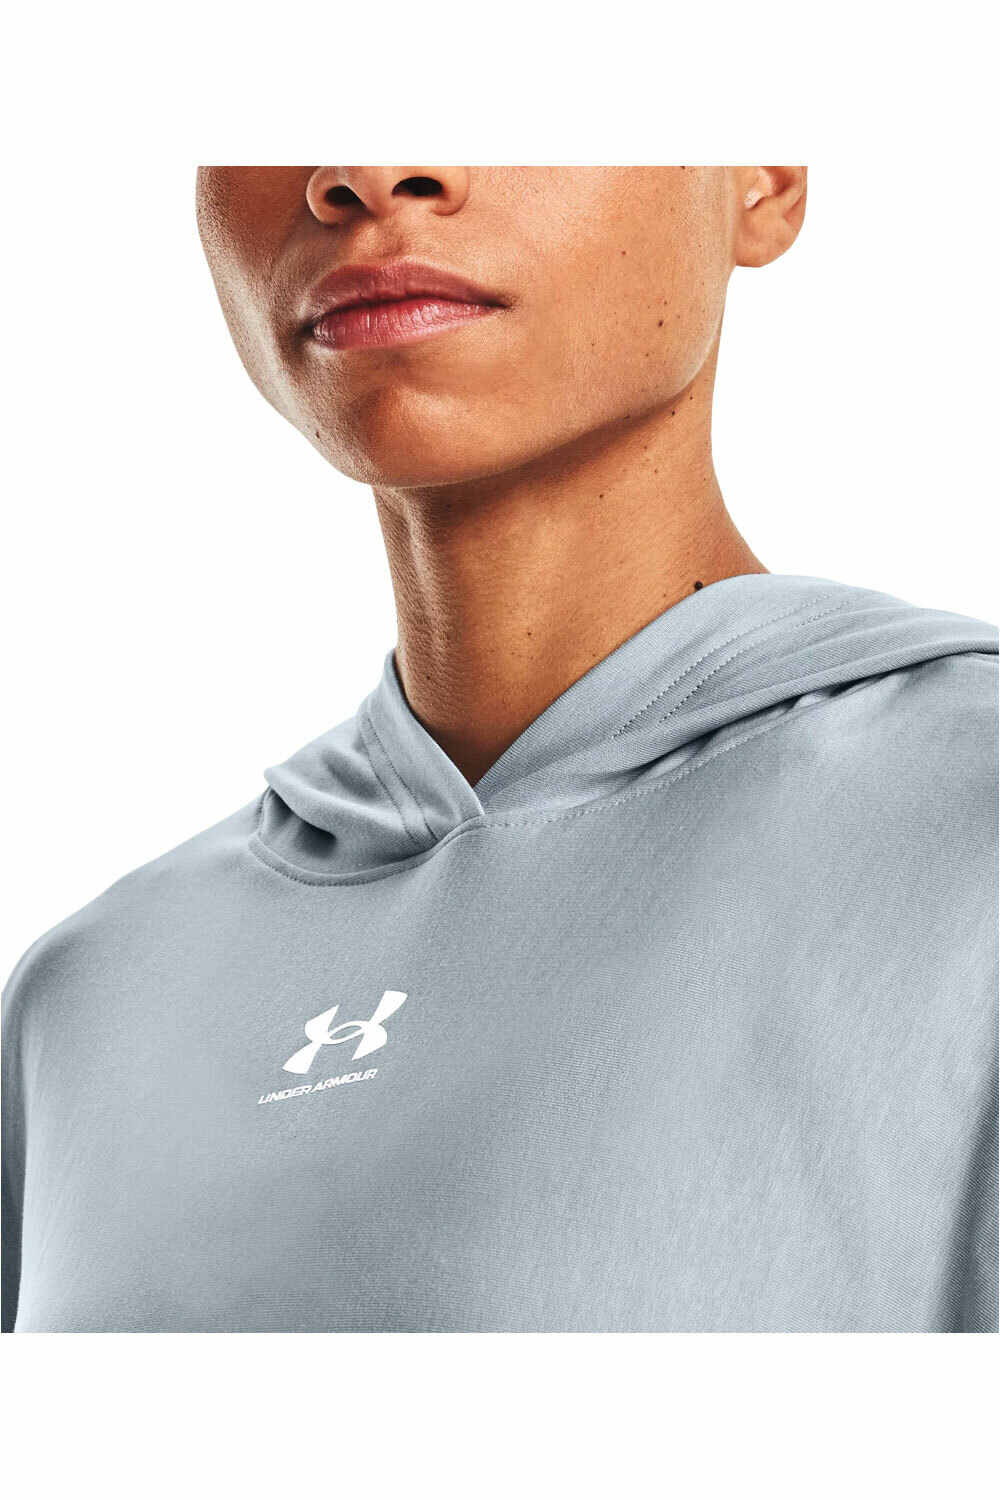 Under Armour sudadera mujer UA Rival Terry Oversized HD vista detalle